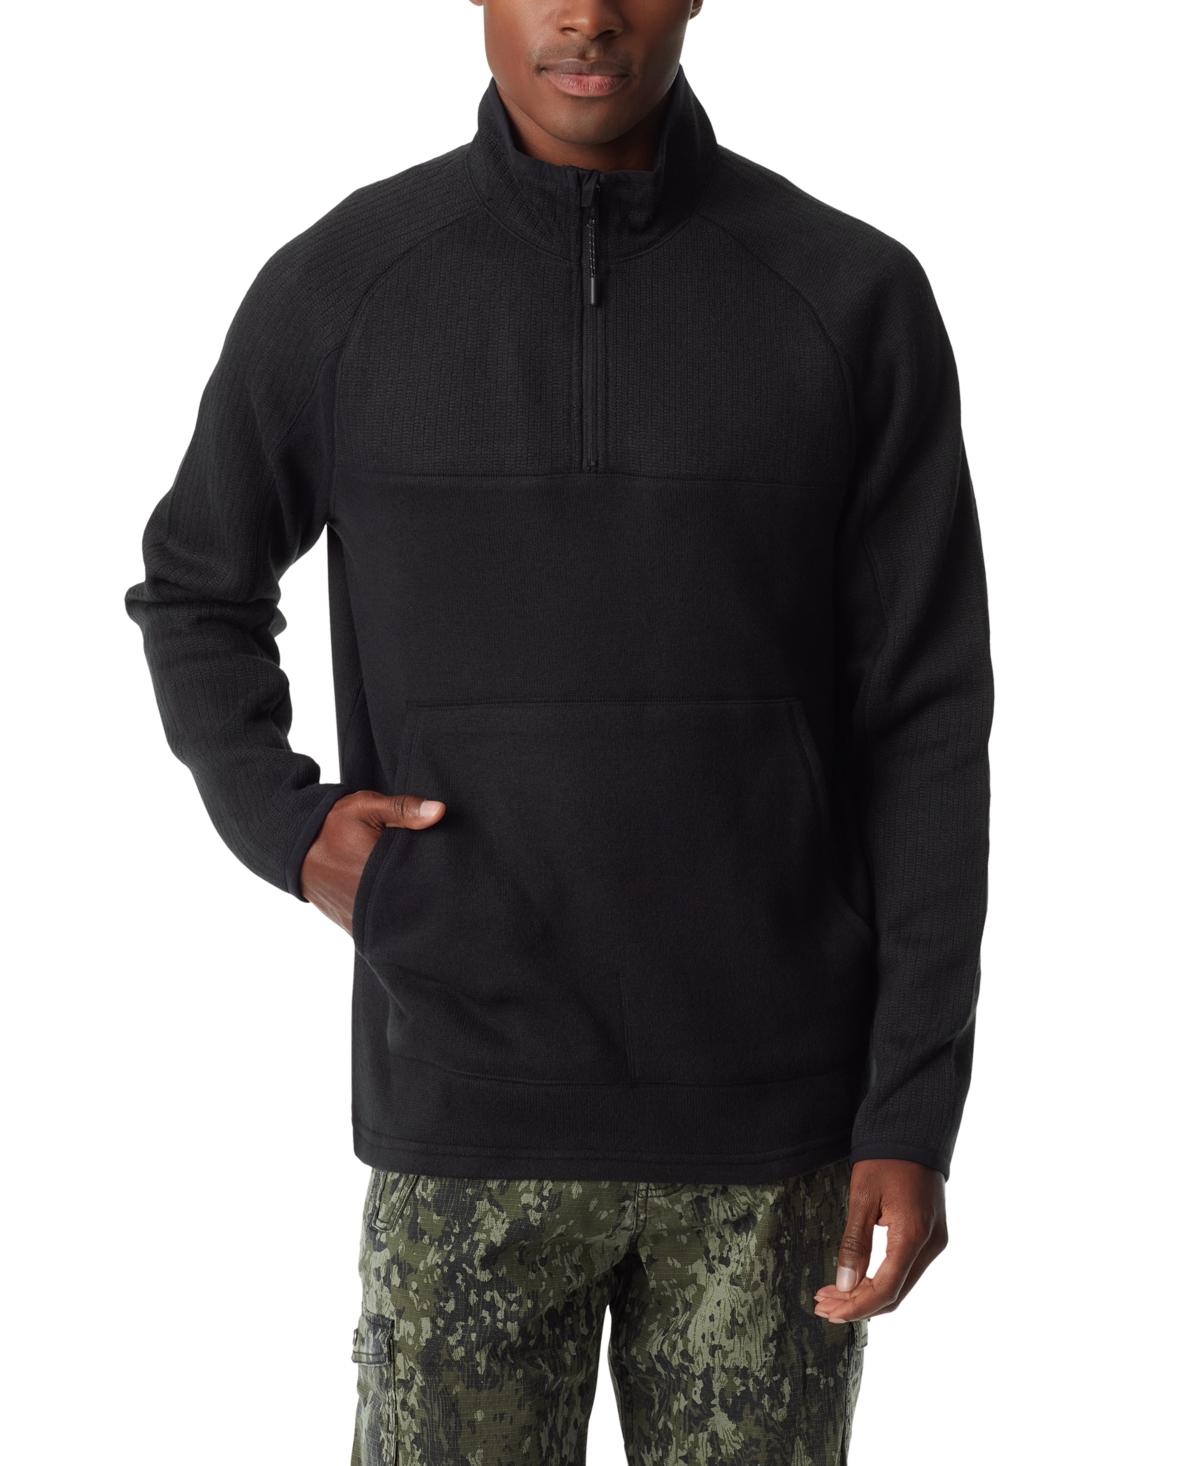 Men's Quarter-Zip Long Sleeve Pullover Sweater - Forged Iron